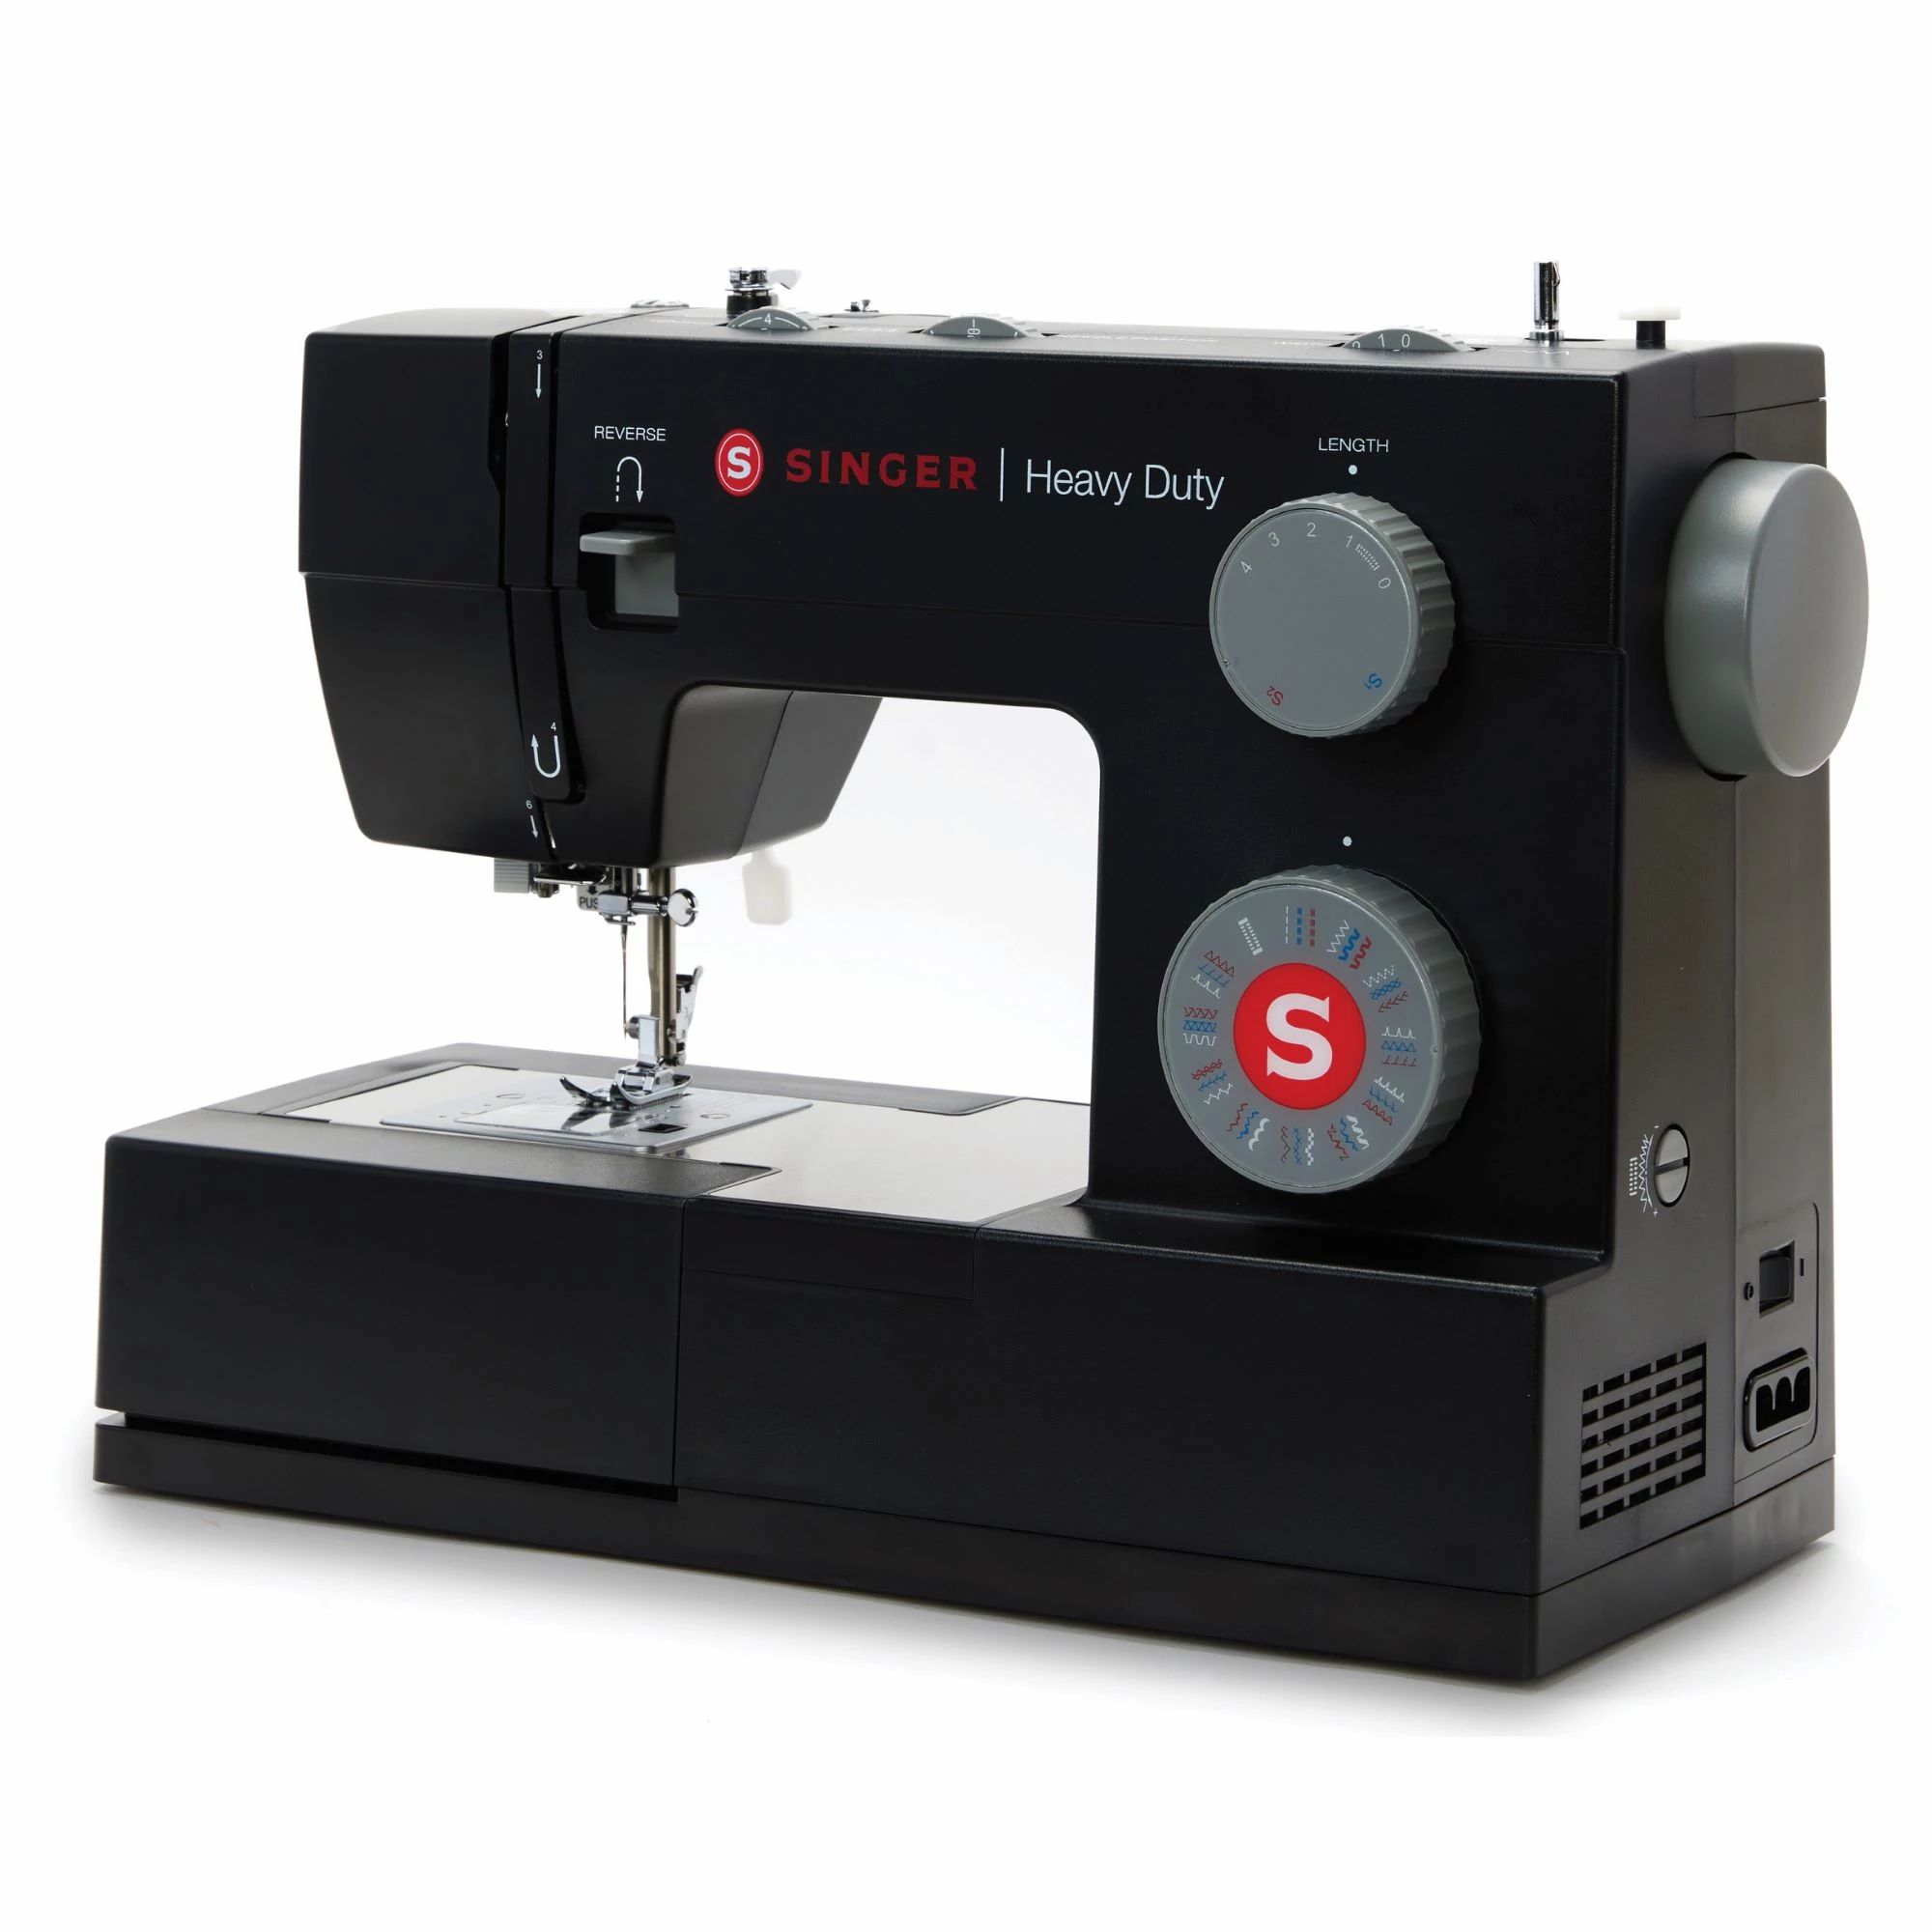 Singer Heavy Duty 4432 Review : Sewing Insight